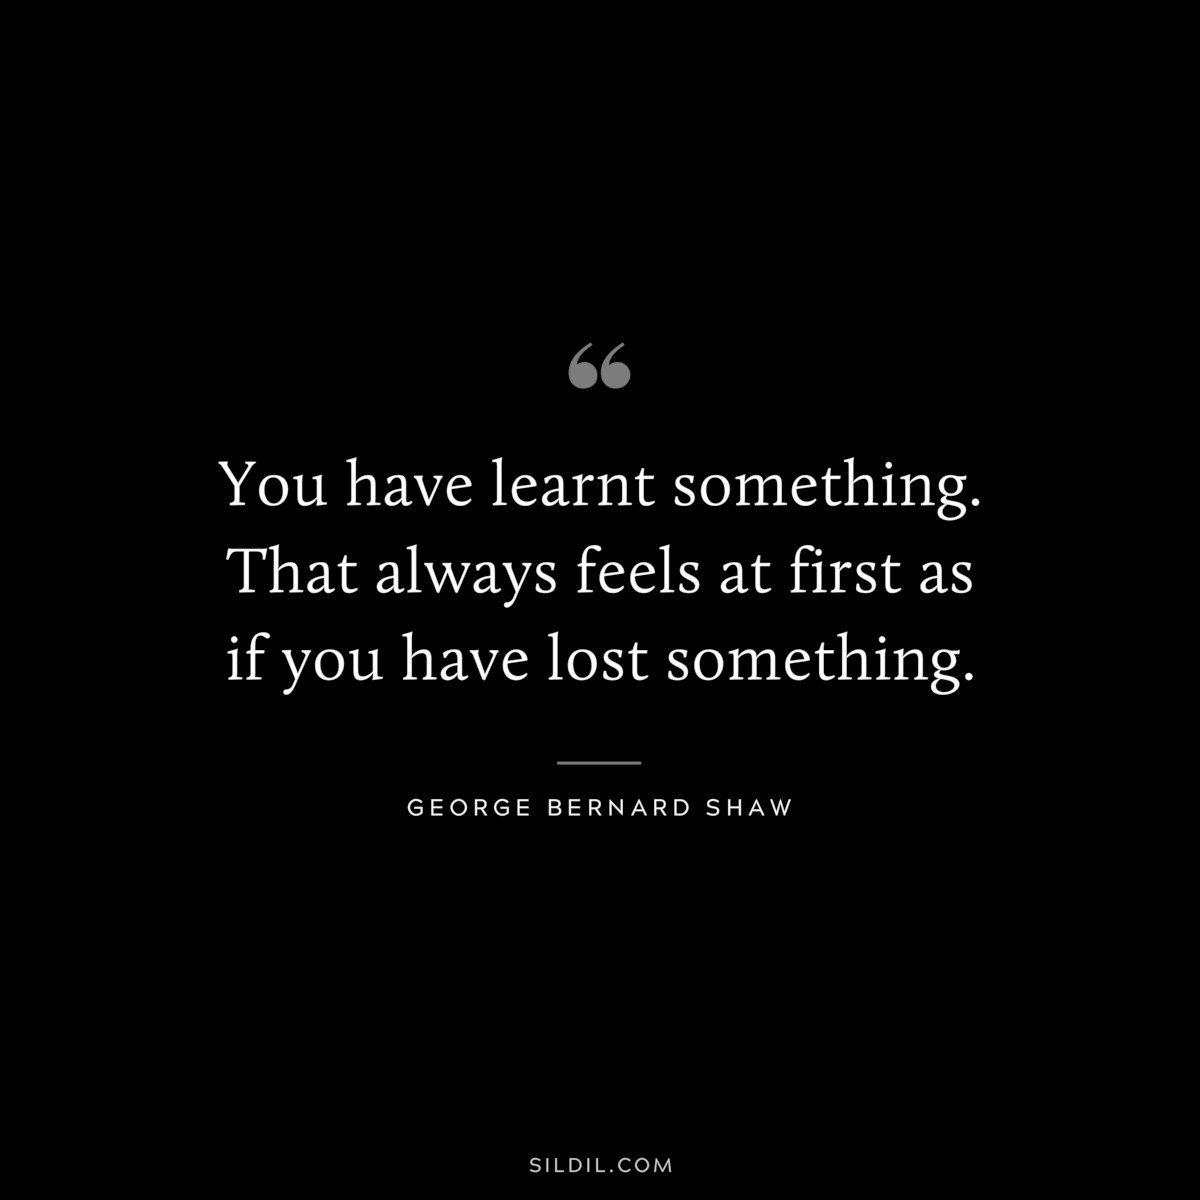 You have learnt something. That always feels at first as if you have lost something. ― George Bernard Shaw